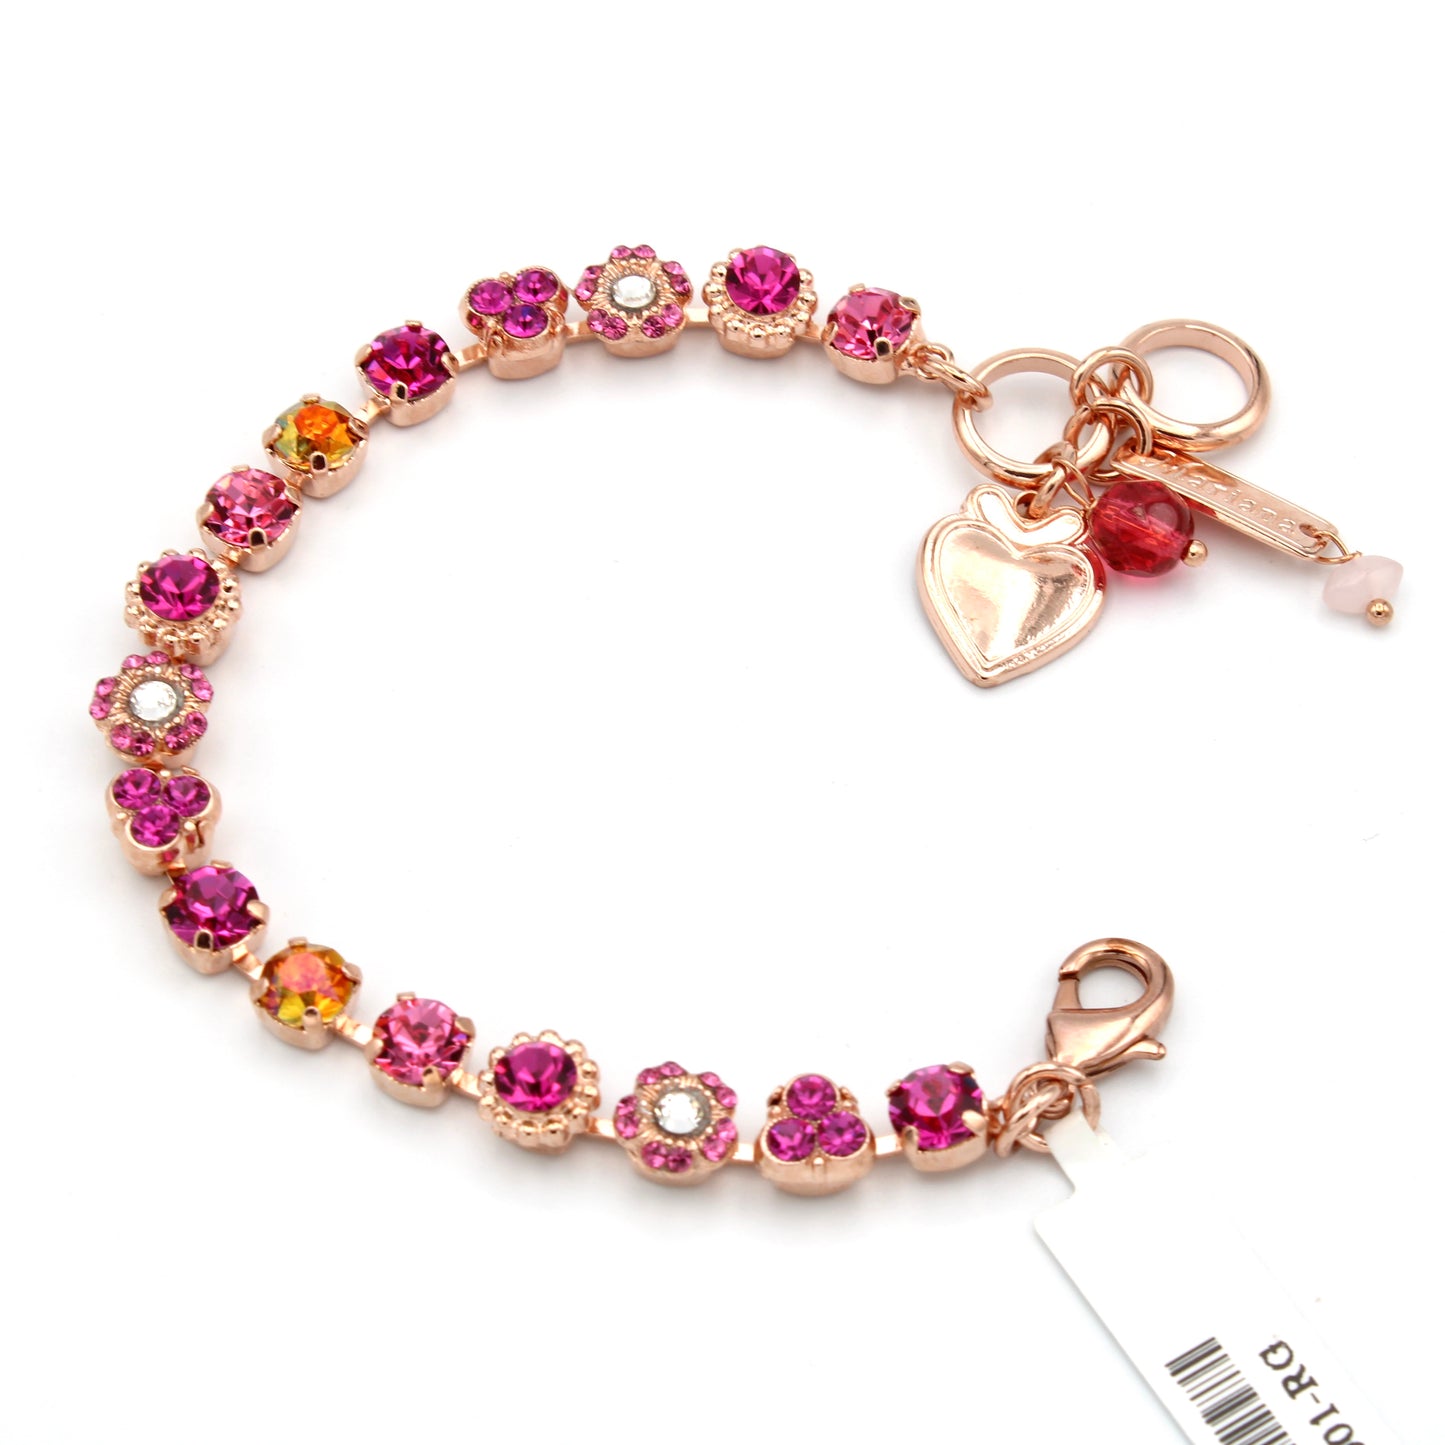 Bougainvillea Collection Petite Blossom Bracelet in Rose Gold